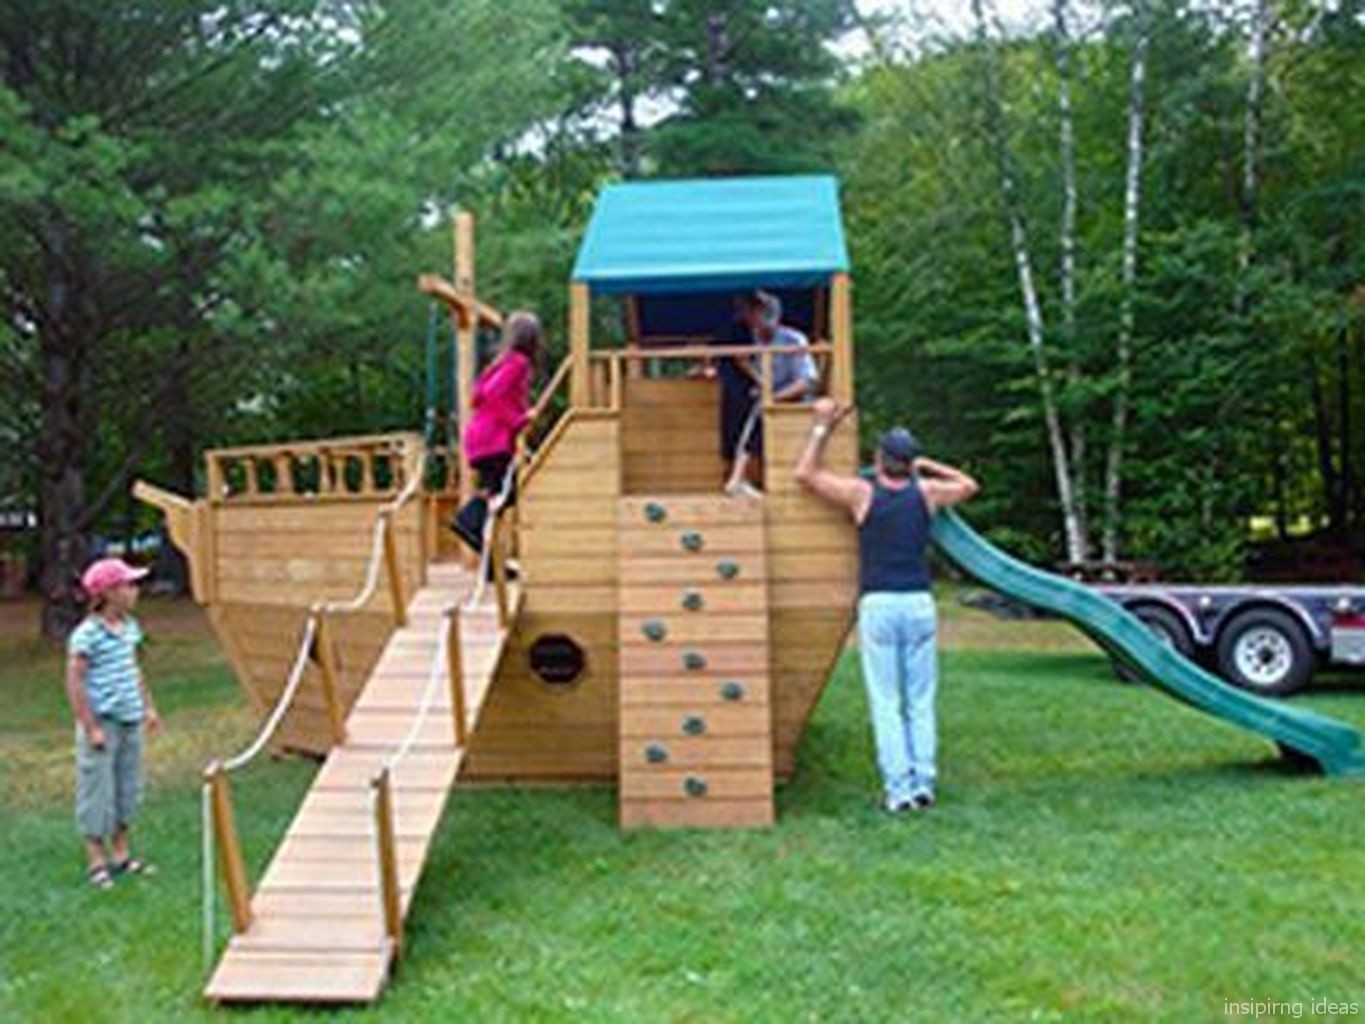 Playhouse swing set plans view source more pirate ship playground